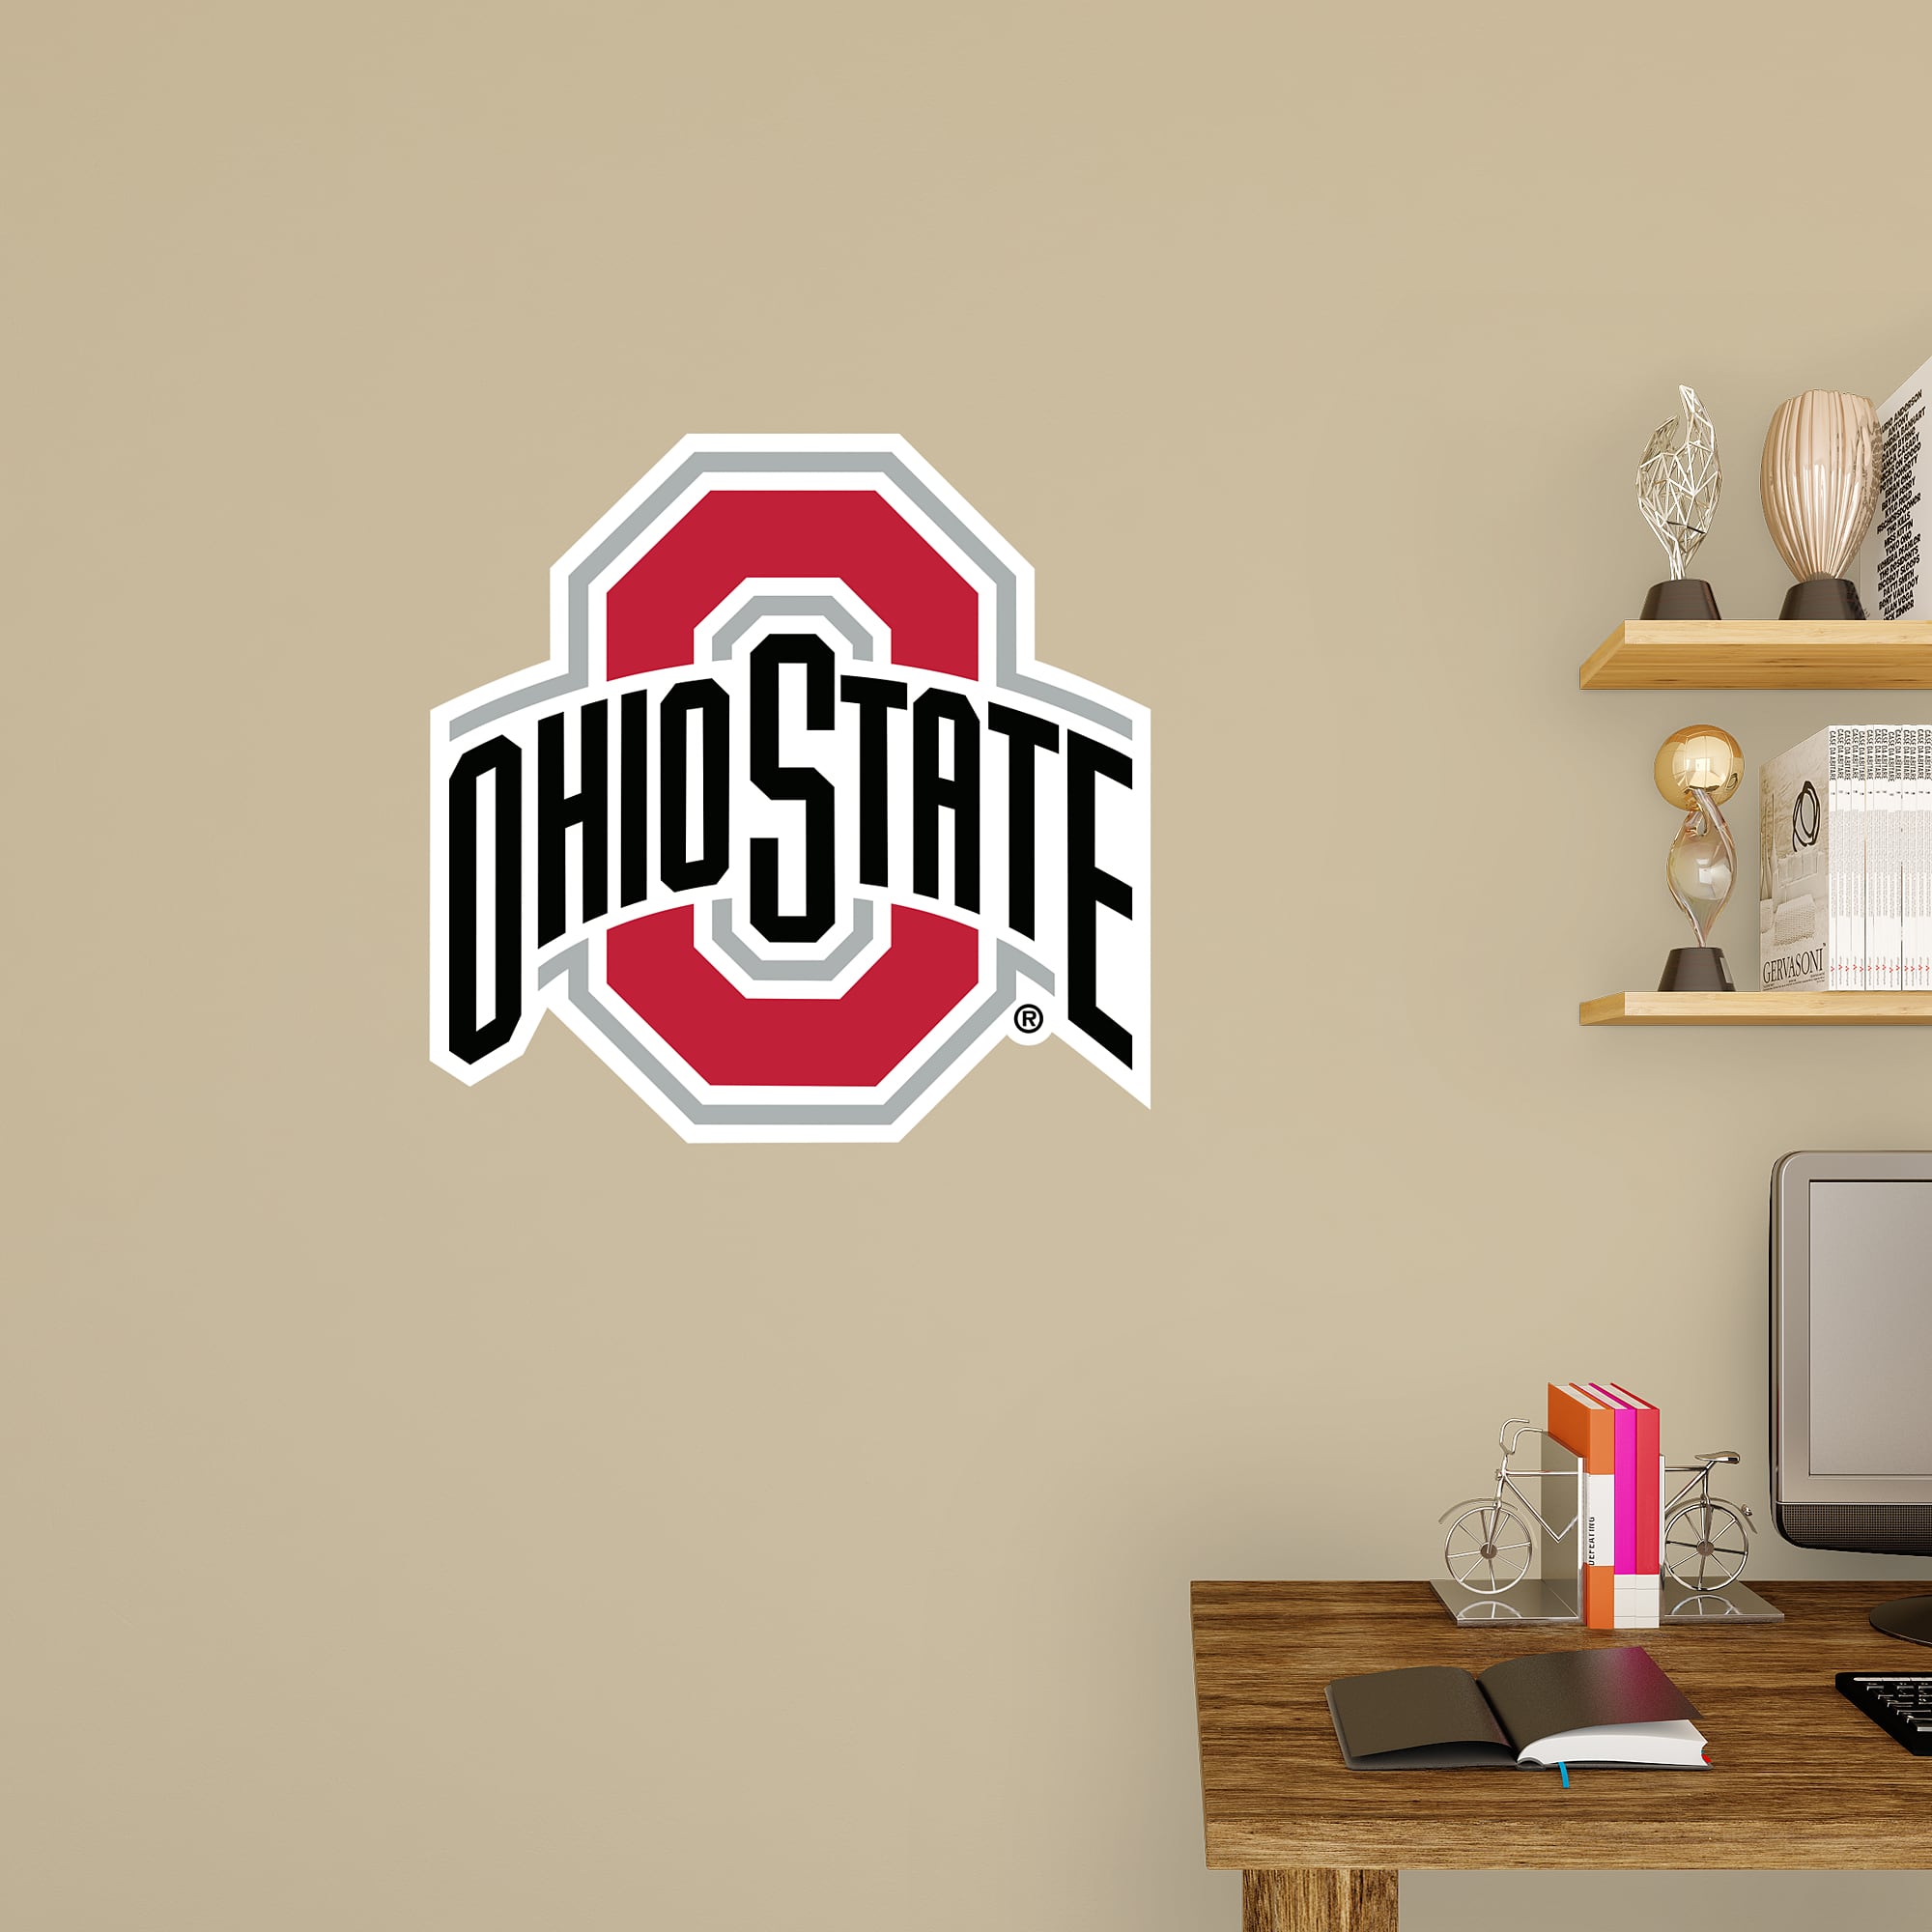 Ohio State Buckeyes: Logo - Officially Licensed Removable Wall Decal 24.0"W x 23.0"H by Fathead | Vinyl